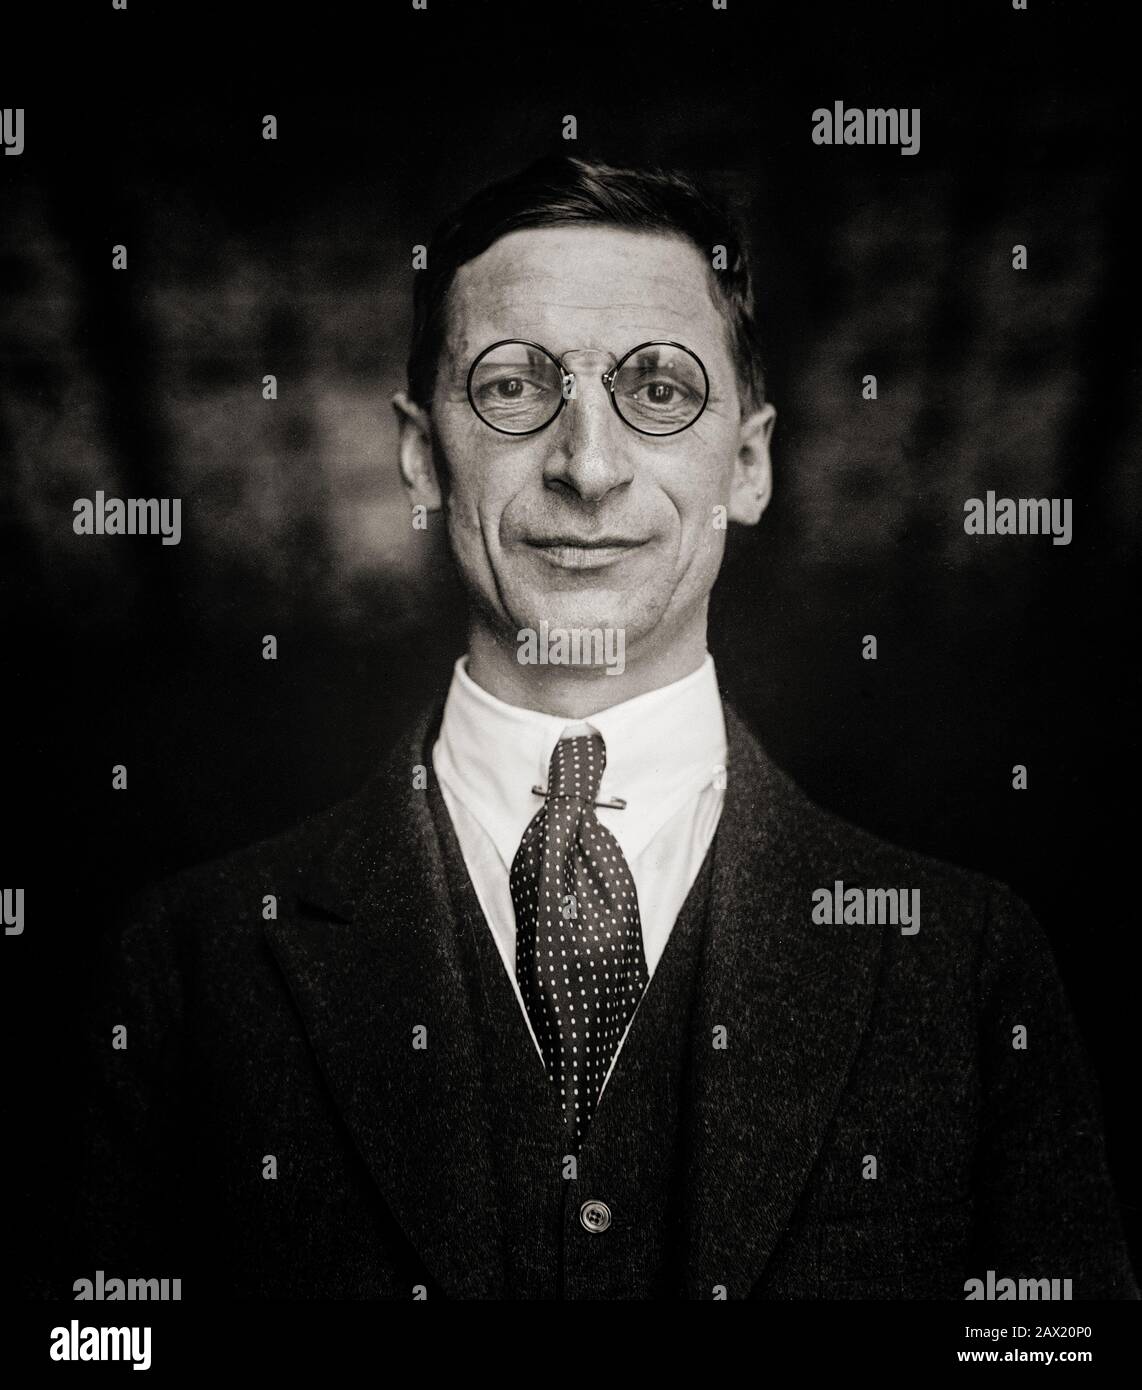 A 1922 portrait of Éamon de Valera (1882-1975), aka Dev, prominent statesman and political leader in 20th-century Ireland. Prior to his political career, he was a Commandant during the 1916 Easter Rising. He was sentenced to death but released mostly because of the public response to the British execution of Rising leaders. He returned to Ireland after being jailed in England and became one of the leading political figures of the War of Independence. After the signing of the Anglo-Irish Treaty, de Valera became political leader of Anti-Treaty Sinn Féin until 1926, when he set up Fianna Fail. Stock Photo